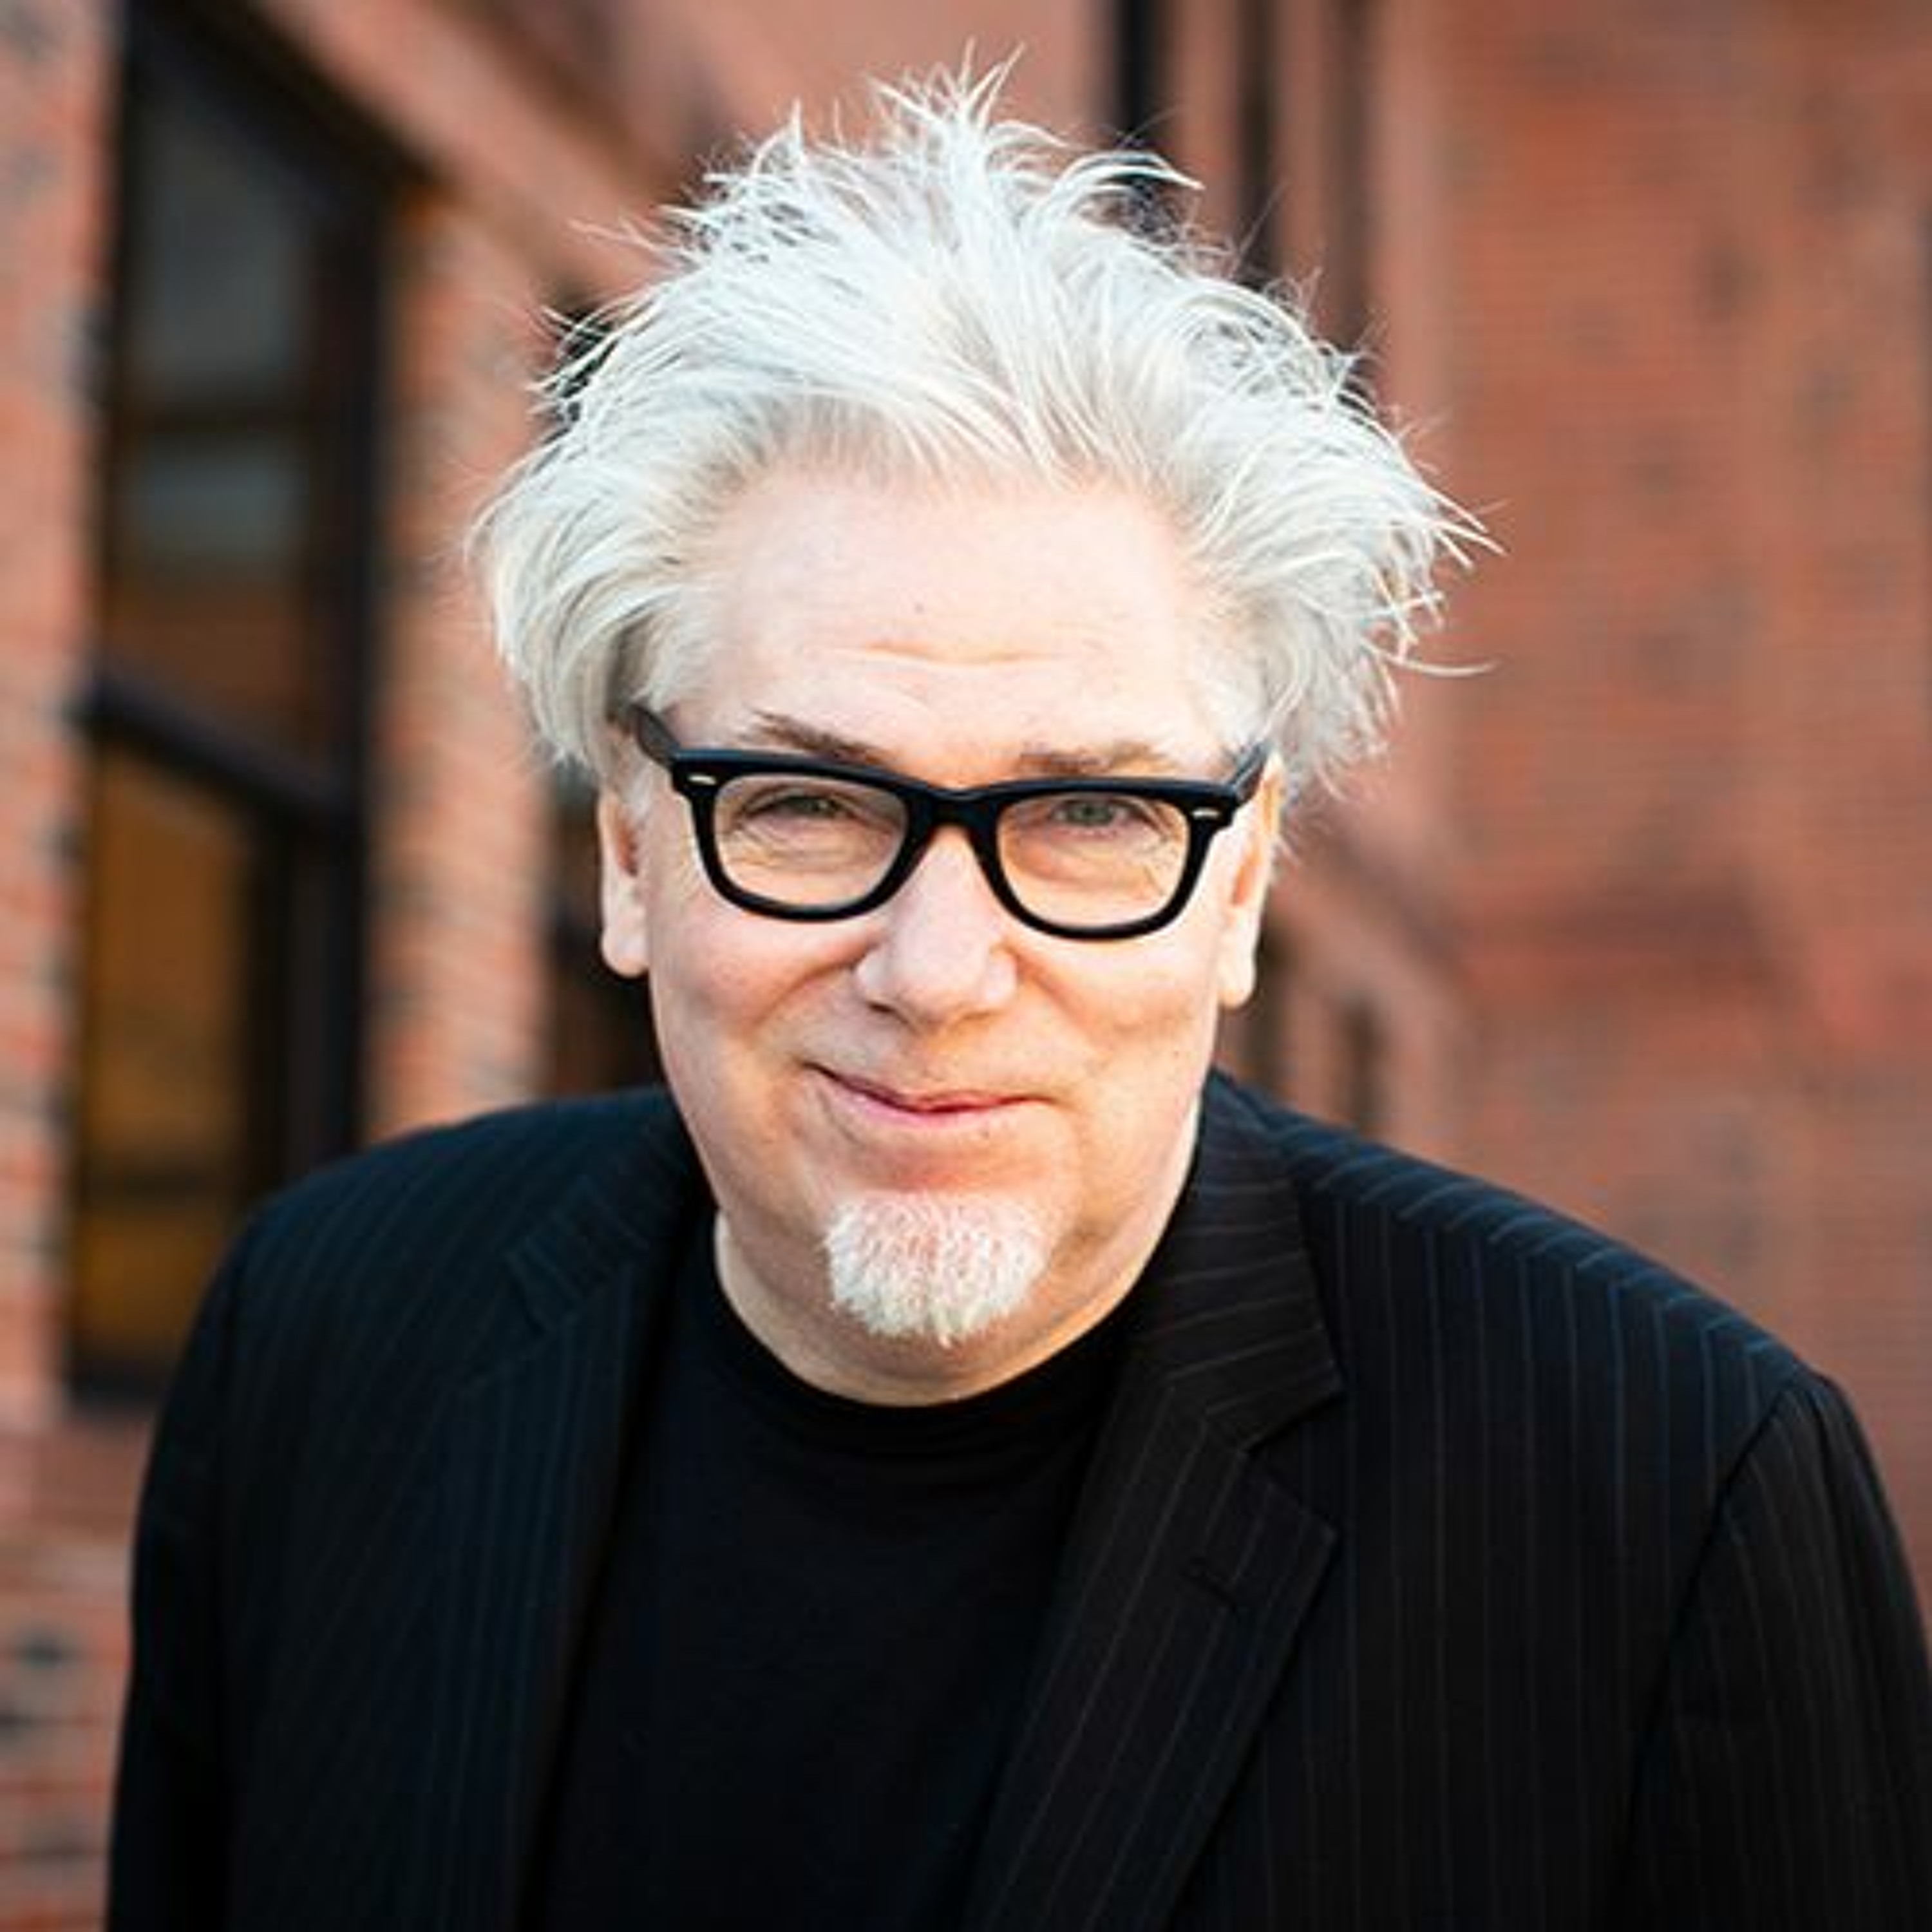 VNS PODCAST - FROM MARCH 13, 2021 - MARTIN ATKINS